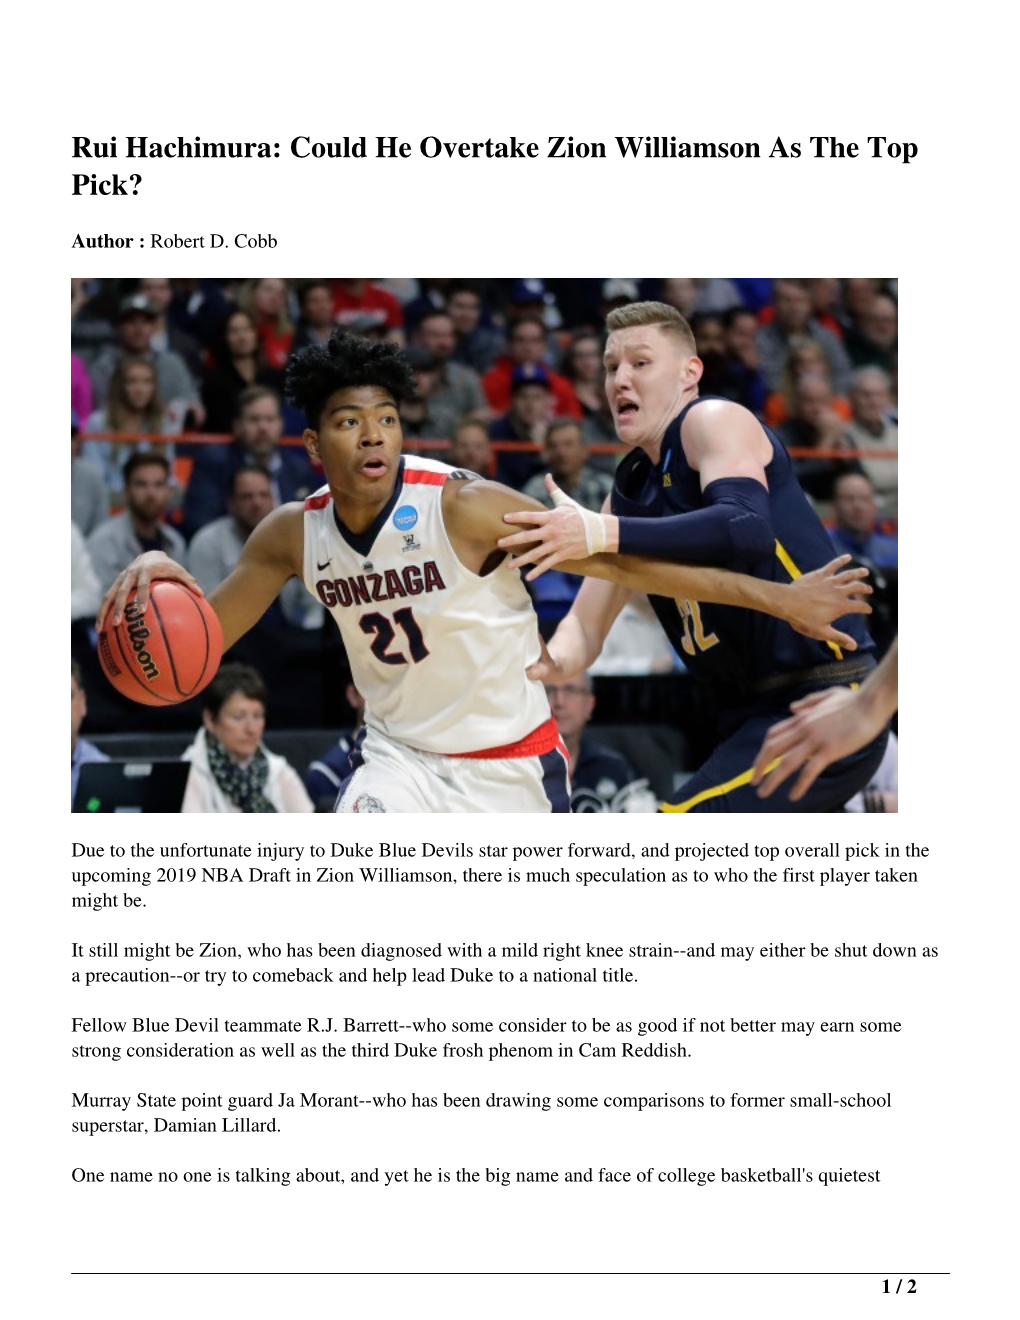 Rui Hachimura: Could He Overtake Zion Williamson As the Top Pick?